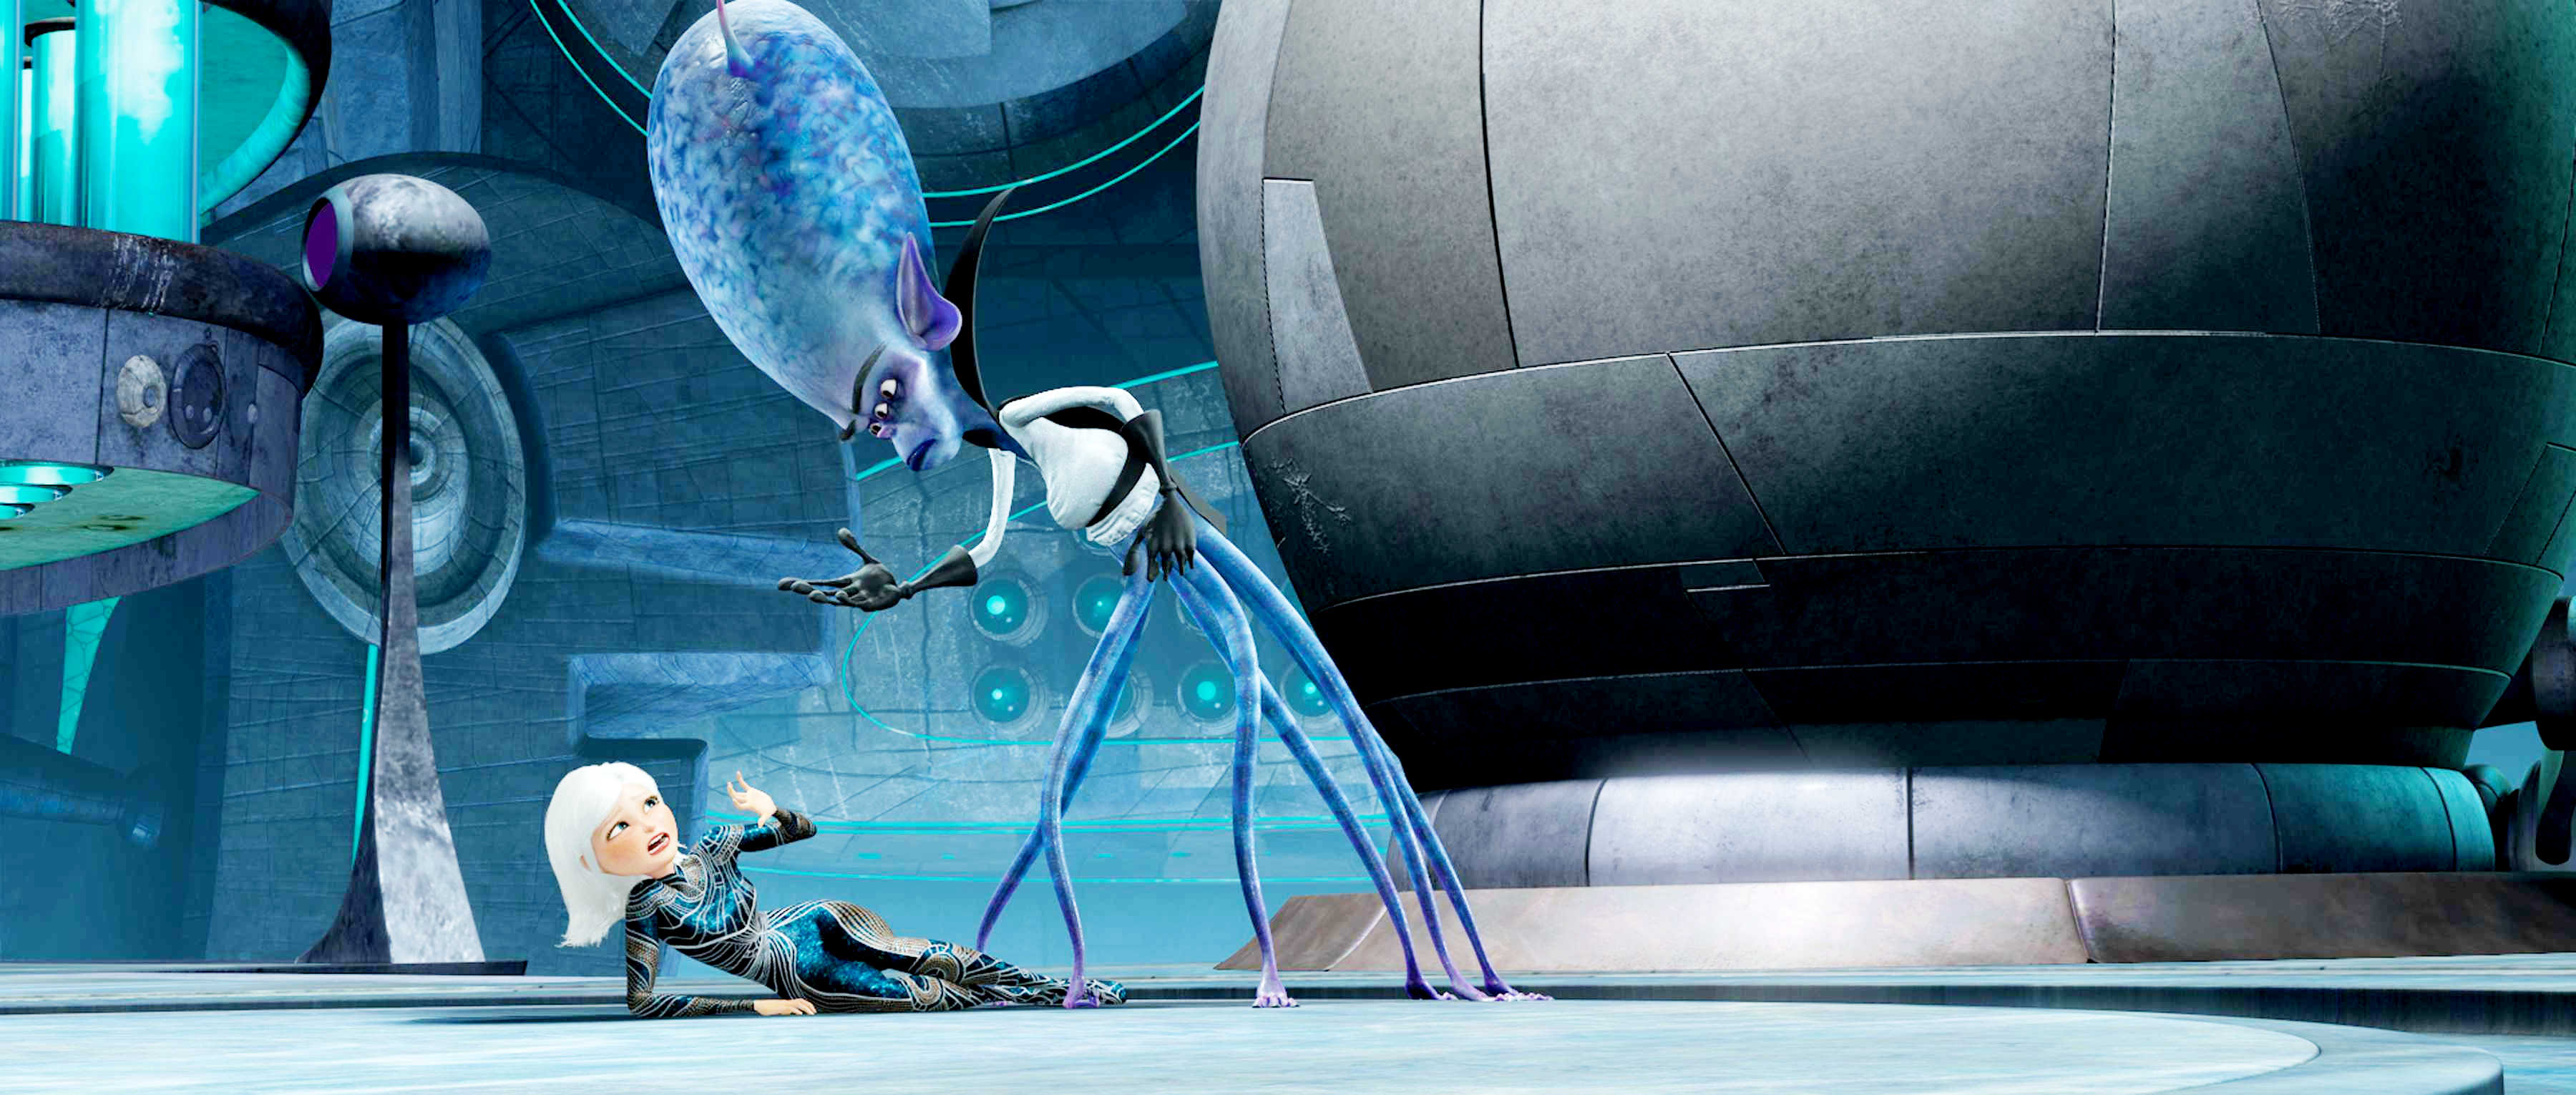 A scene from Paramount Pictures' Monsters vs. Aliens (2009)